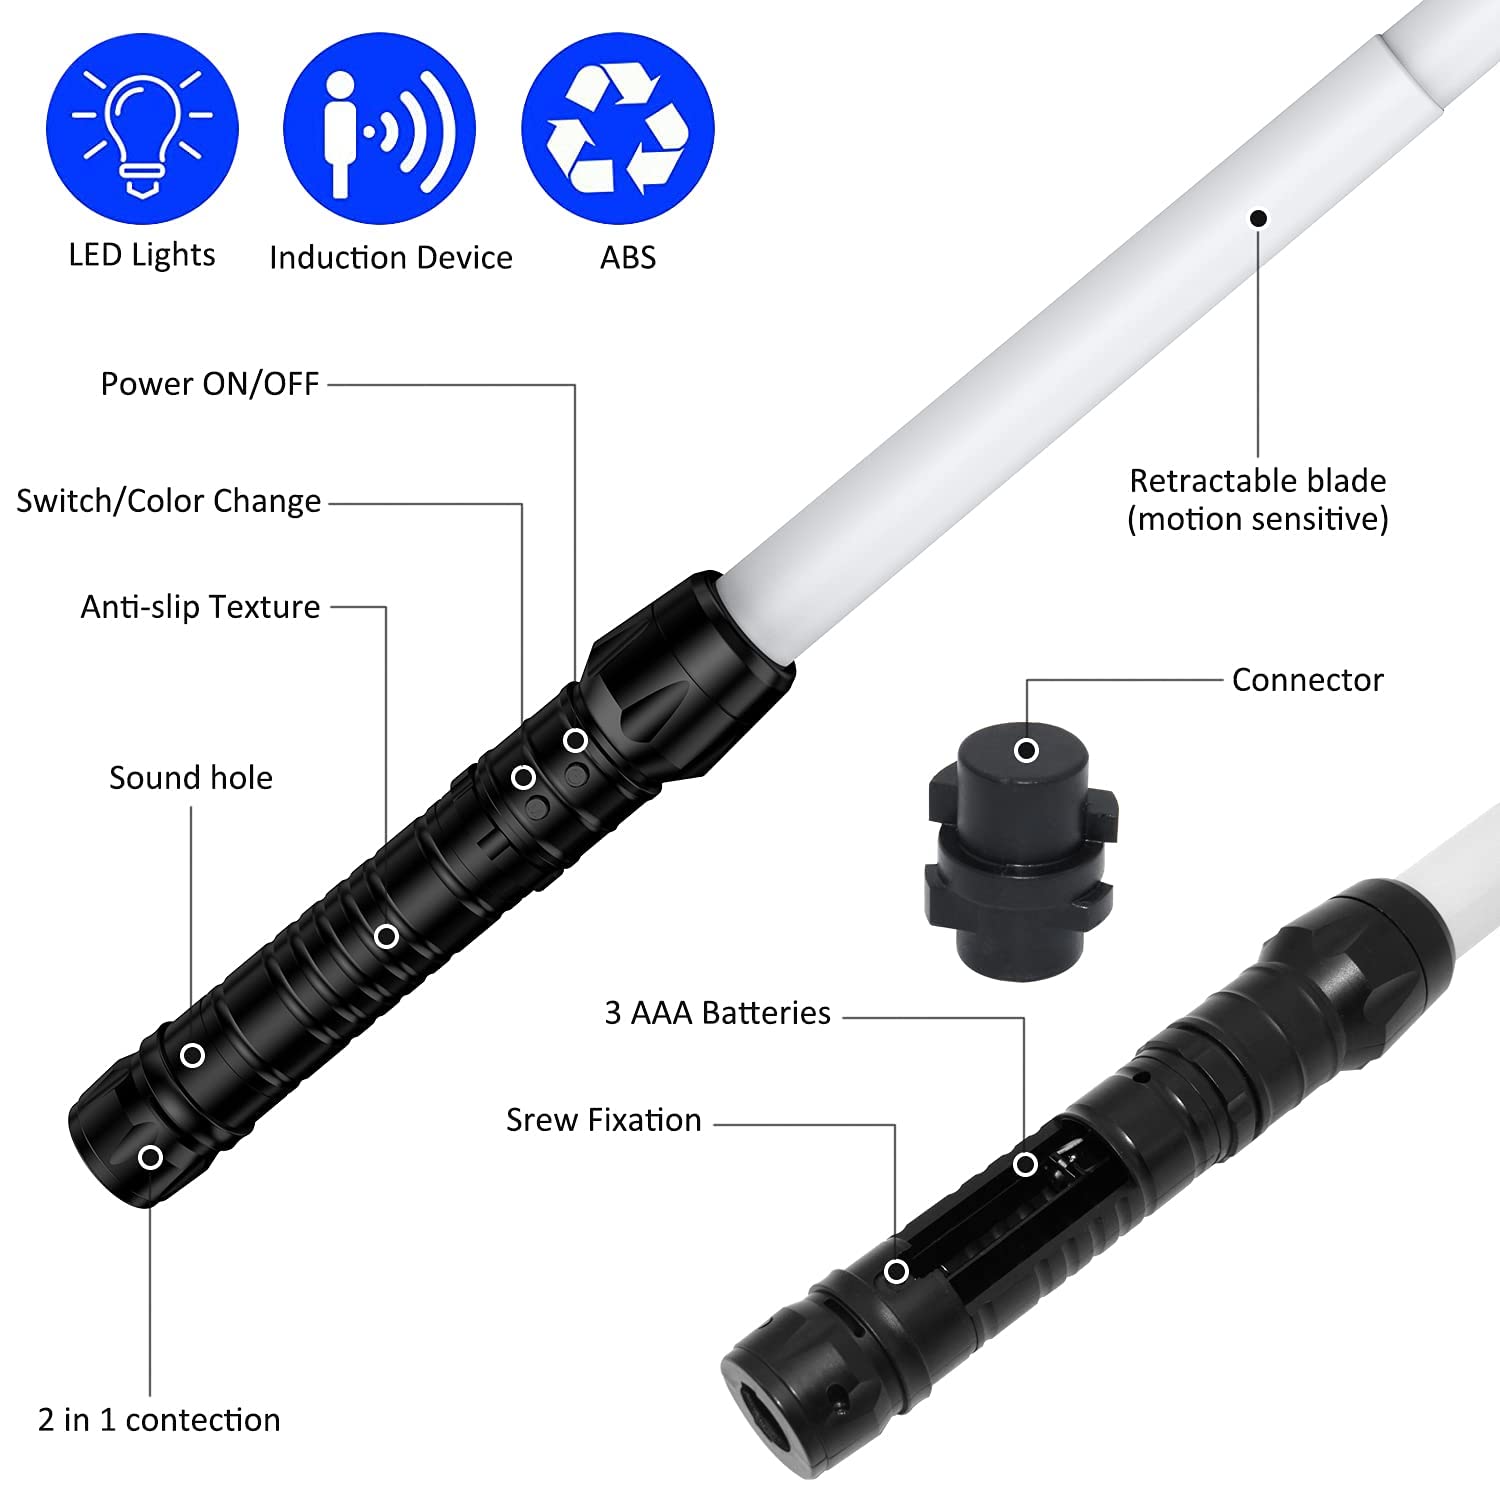 (🔥New Year Early Sales 50% OFF) 7 Colors Retractable Light Saber with Sounds Effect - BUY 3 FREE SHIPPING